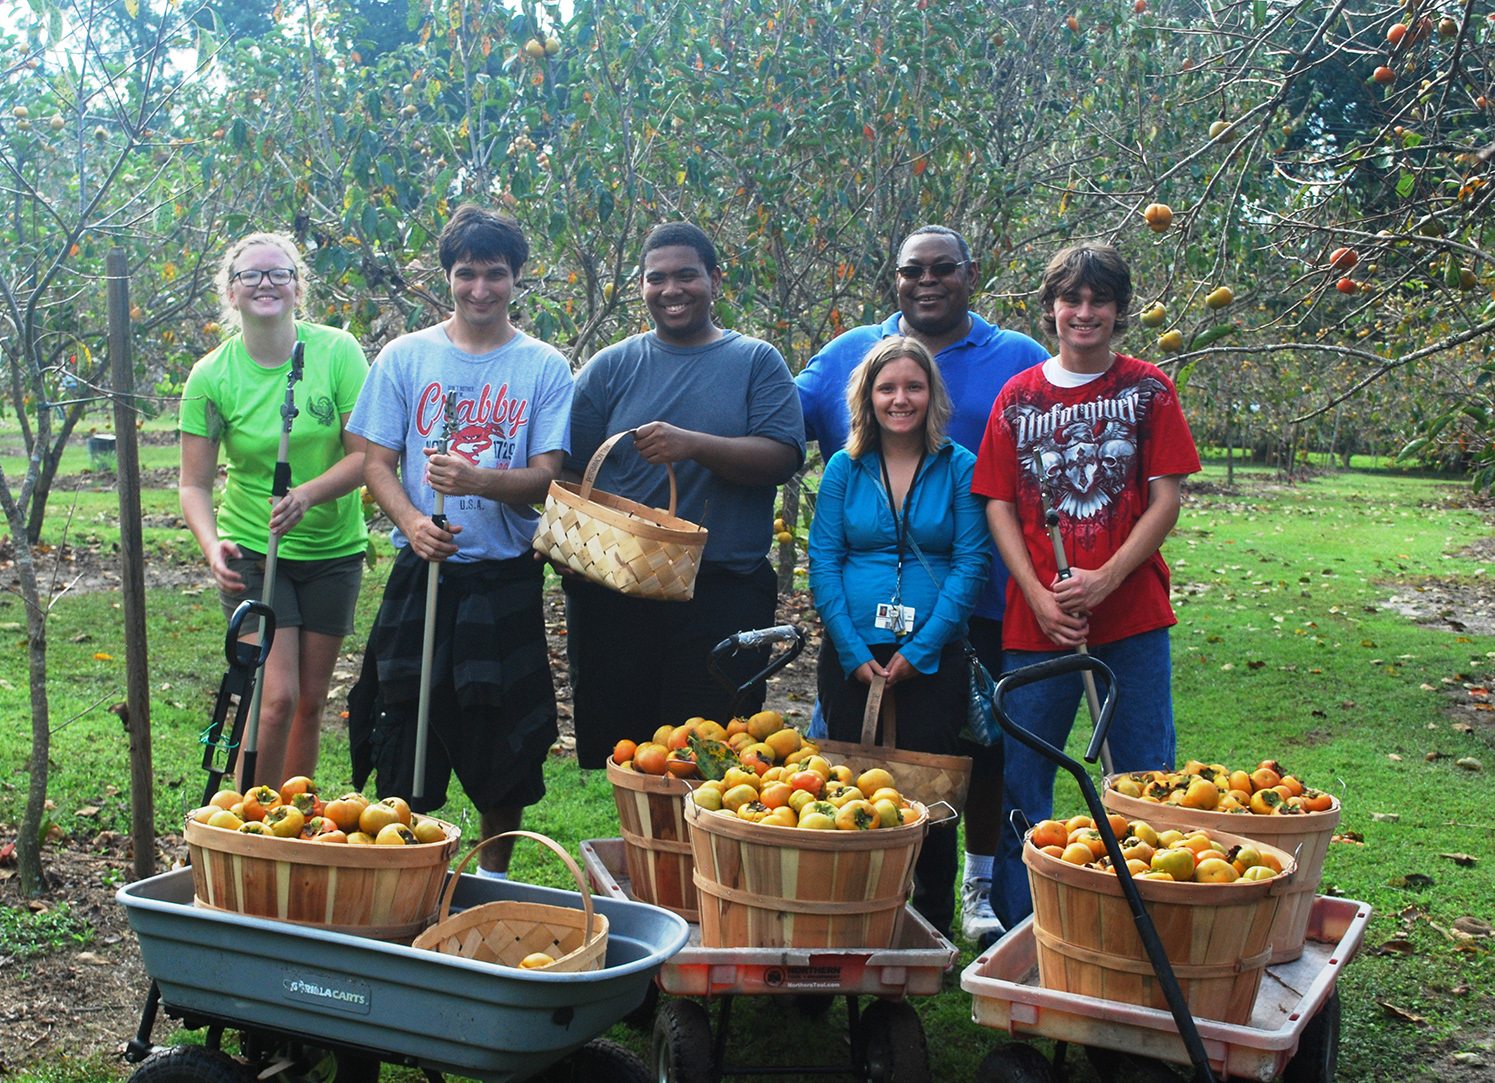 Full wagons after persimmon picking